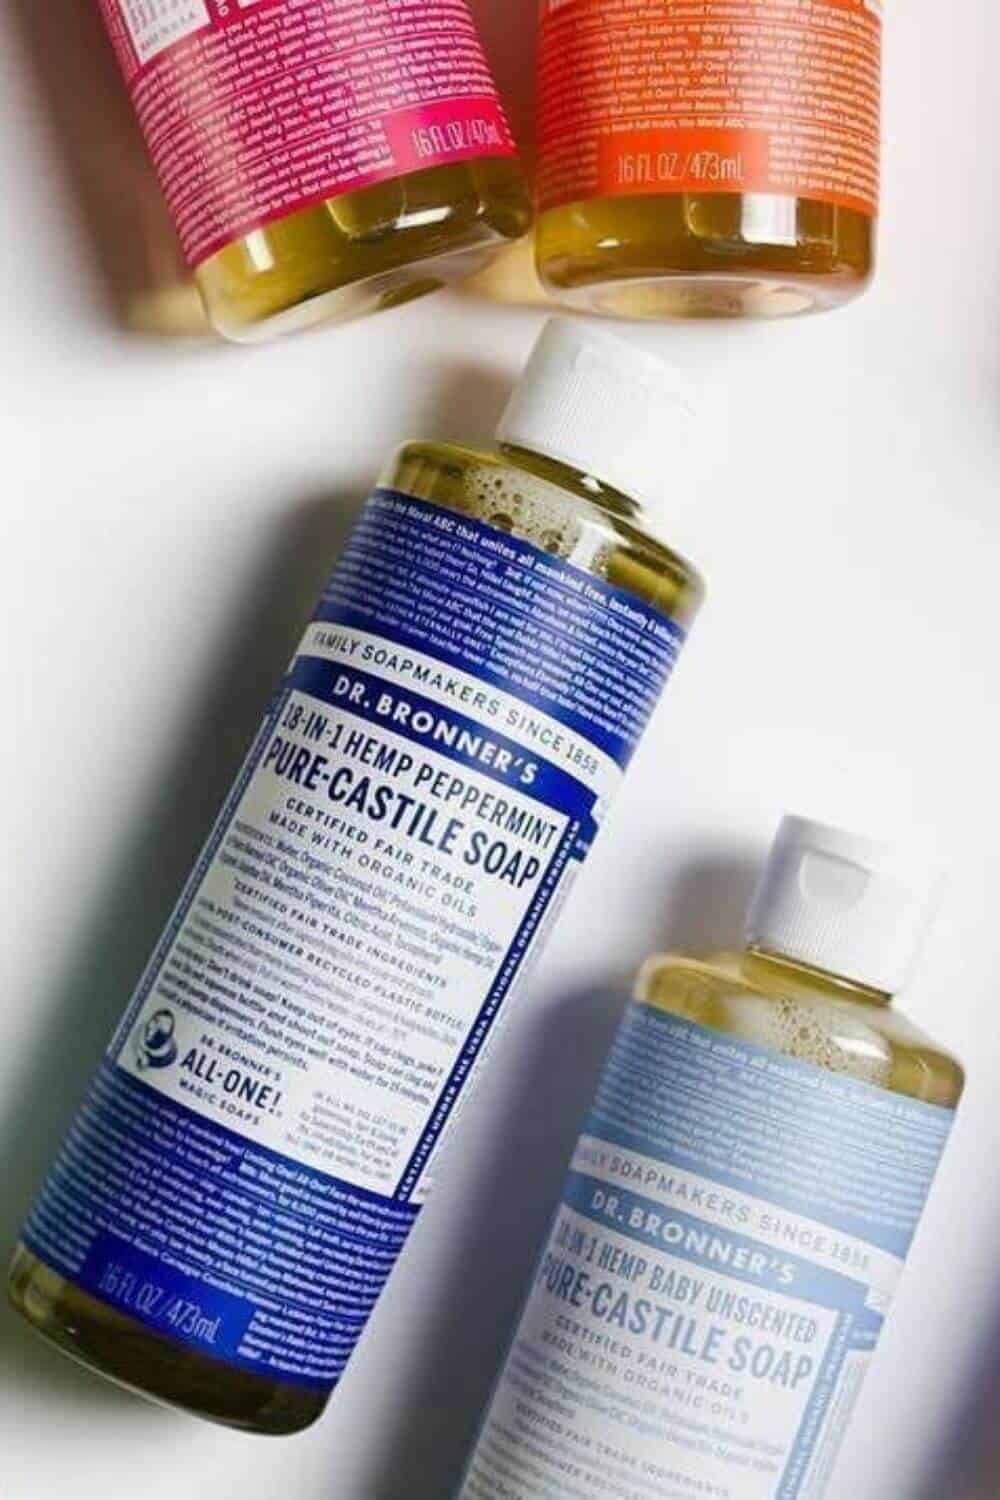 Whether you have dry or oily hair (or anything in between) there are environmentally friendly shampoo and conditioner brands on here that will do the trick, without leaving a stain on your conscience. Image by Dr Bronners #ecofriendlyshampooandconditioner #sustainablejungle